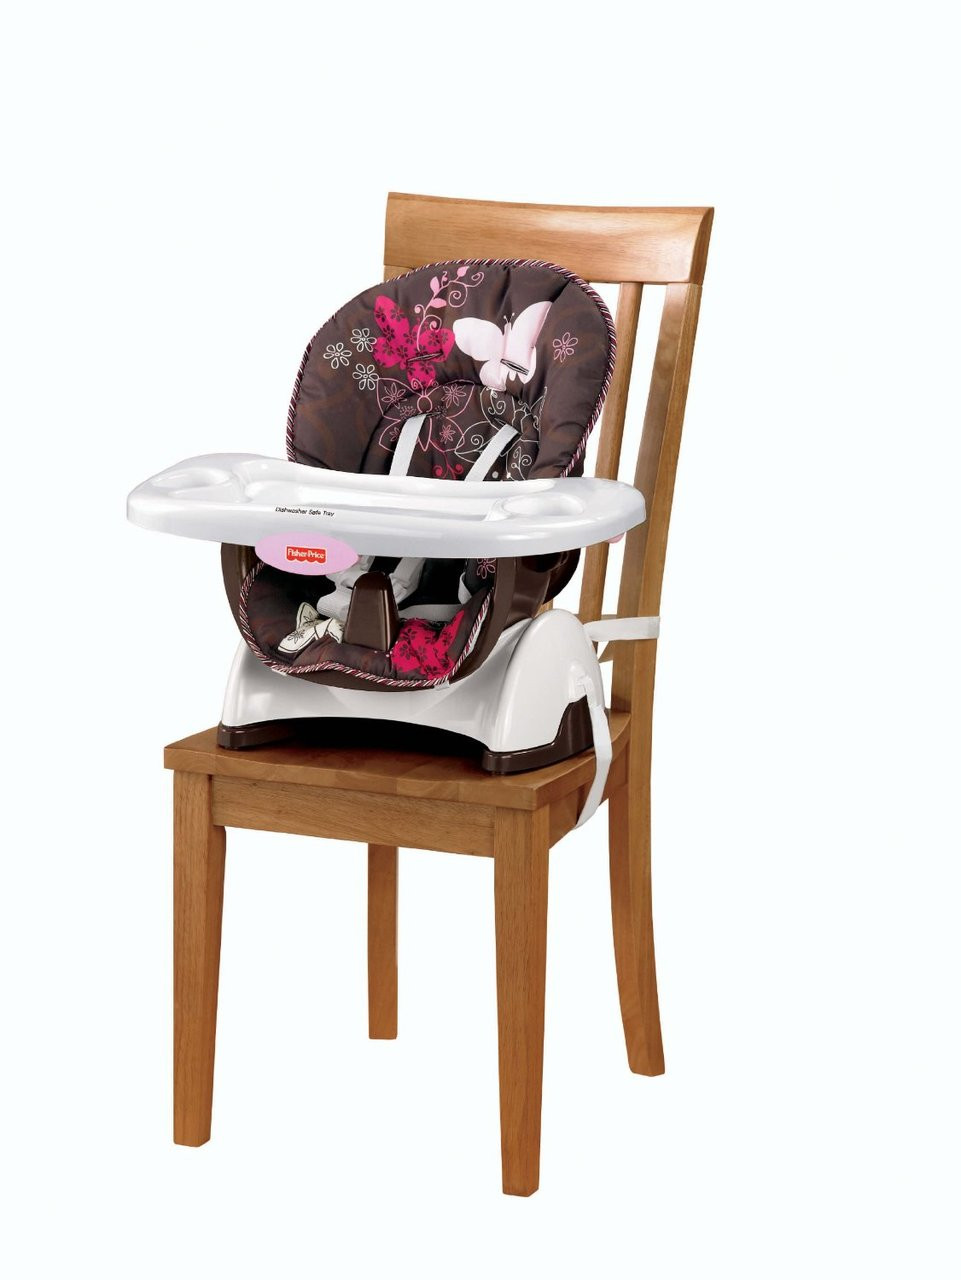 Fisher-Price Space Saver High Chair, Mocha Butterfly - For Moms